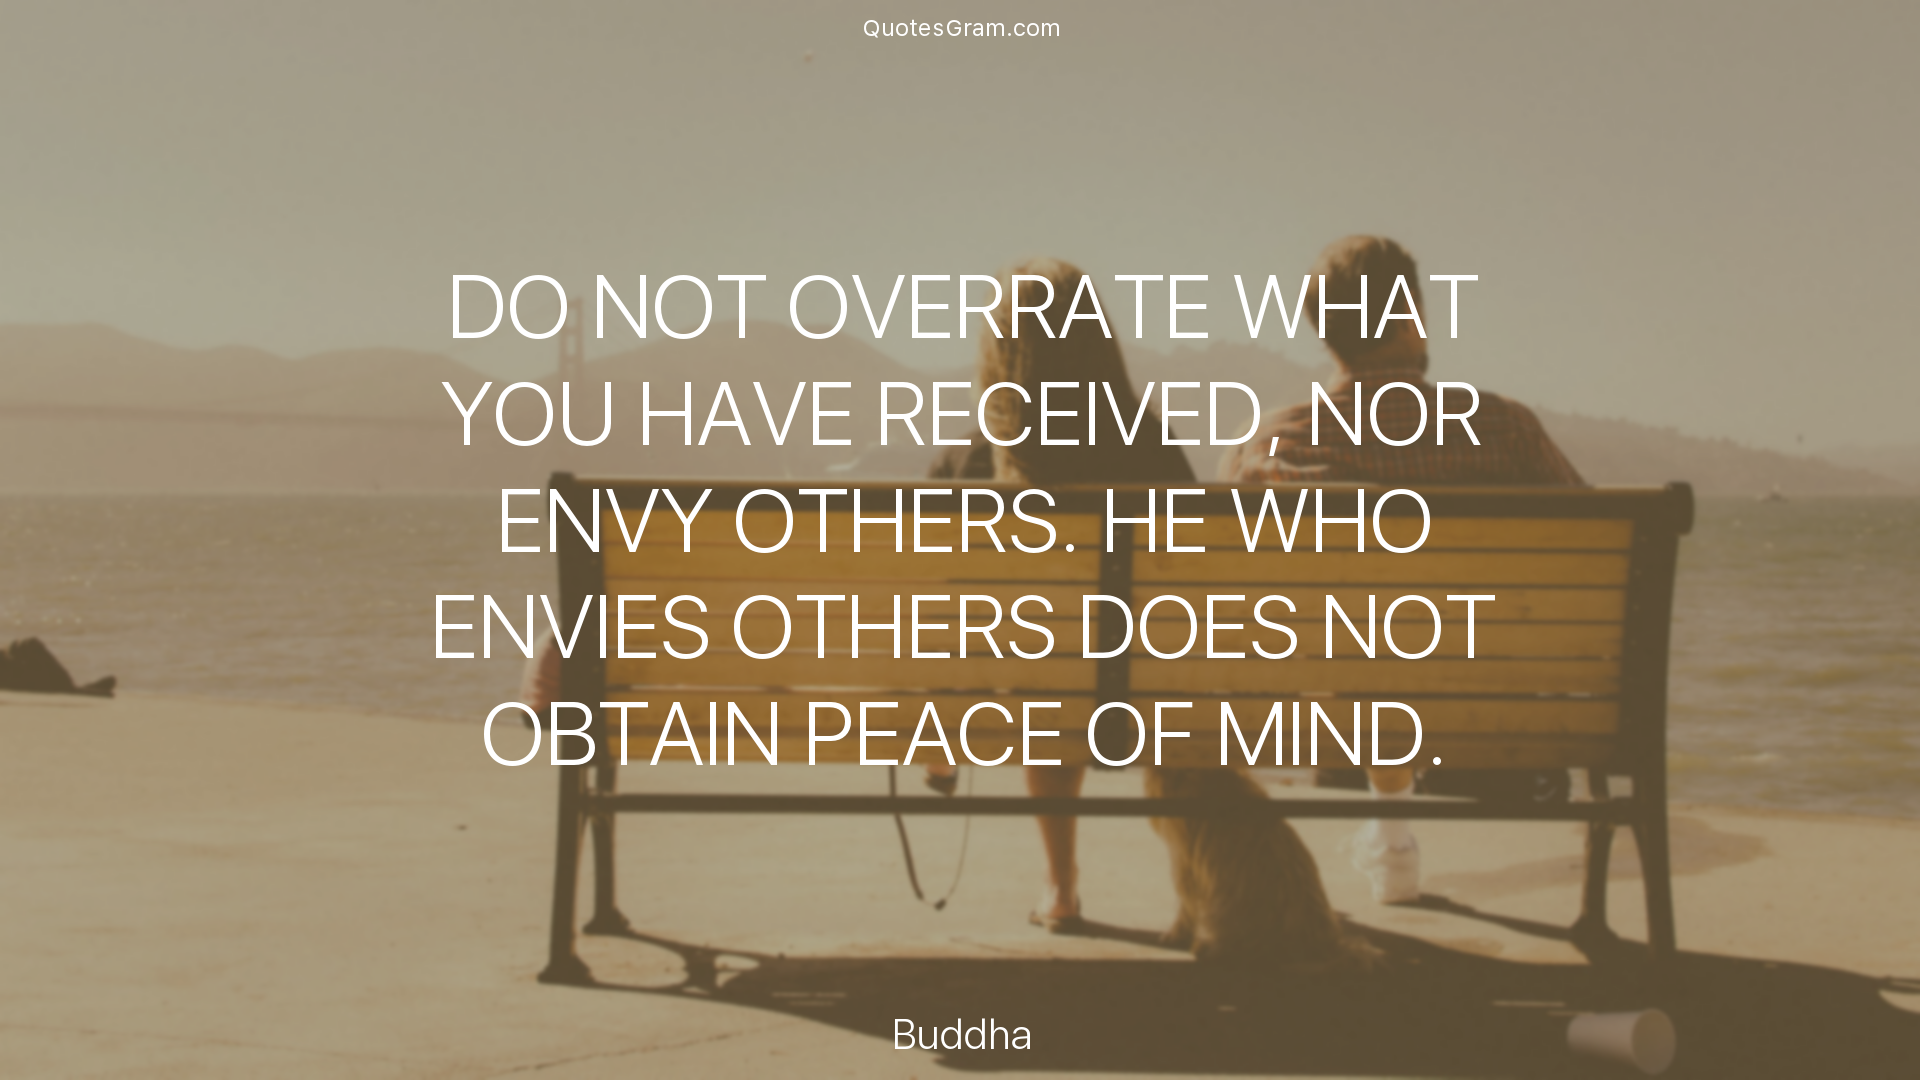 buddha-quote-do-not-overrate-what-you-have-received-nor-envy-others.png